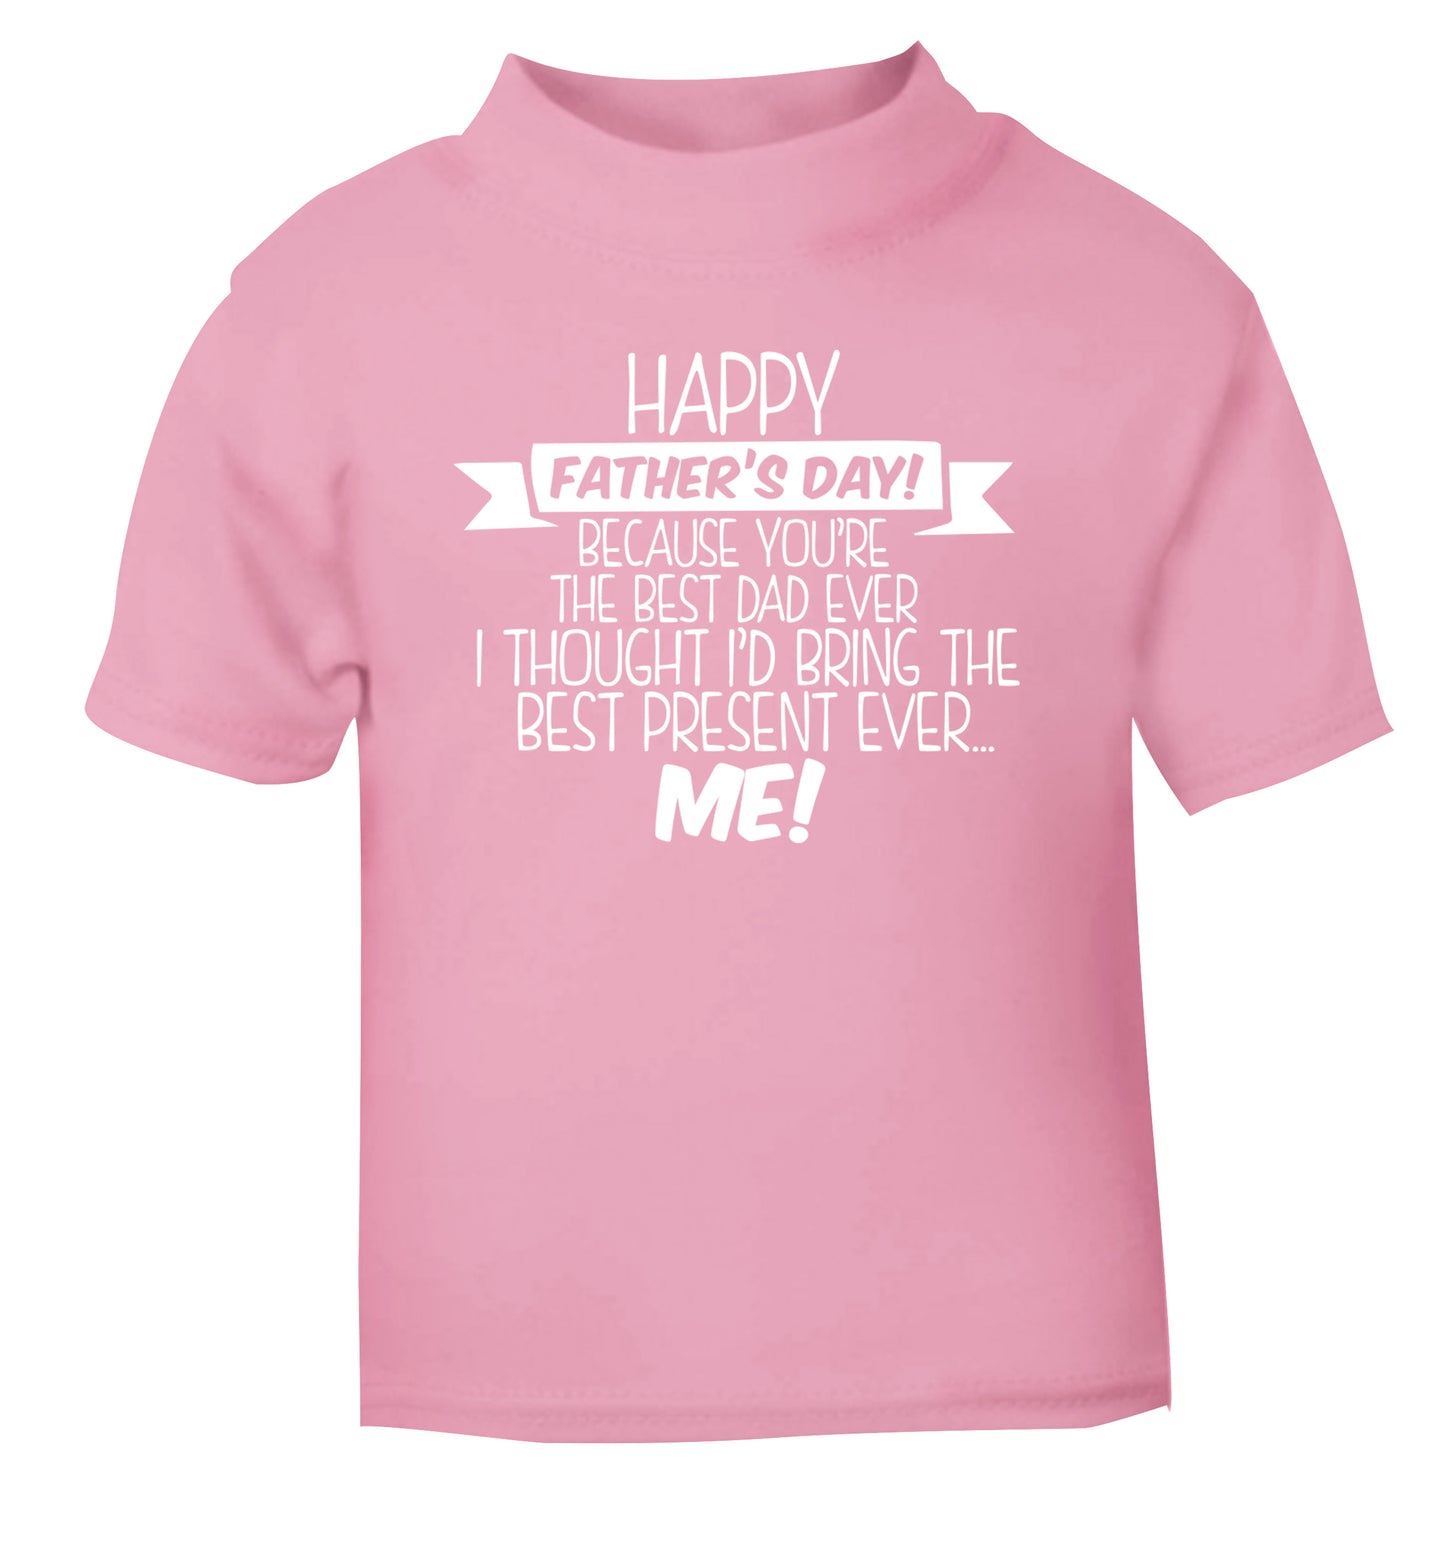 Happy Father's day, because you're the best dad ever I thought I'd bring the best present ever...me! light pink Baby Toddler Tshirt 2 Years